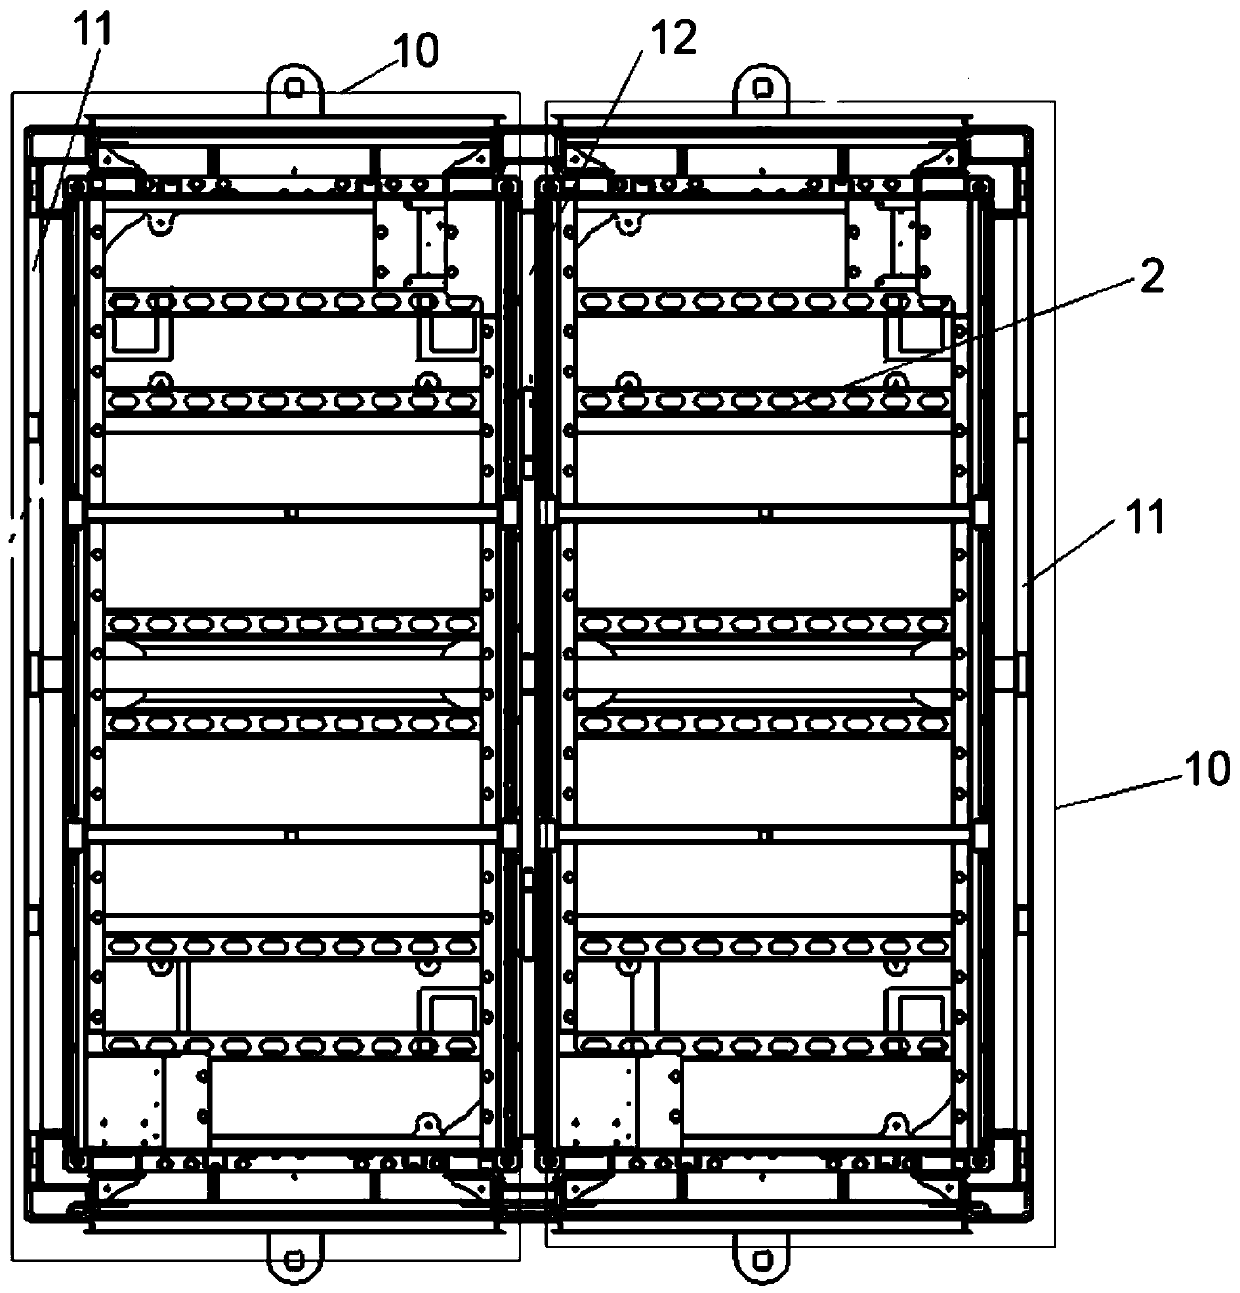 Power battery module structure for locomotive